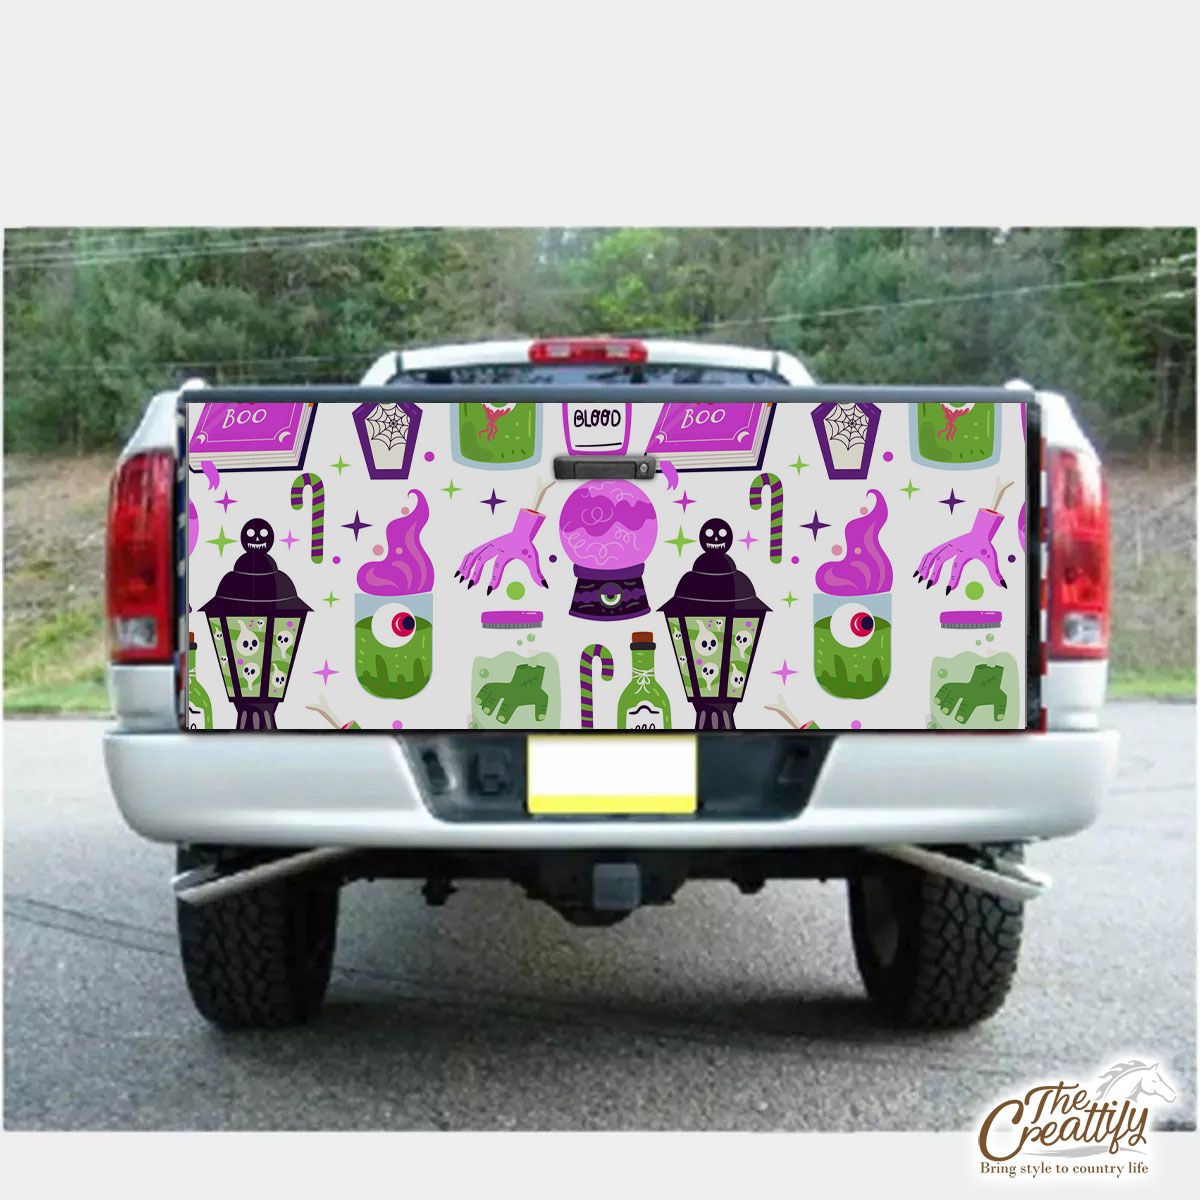 Witch Potions, Creepy Hand, Blood, Wicked Witches Light Halloween Truck Bed Decal